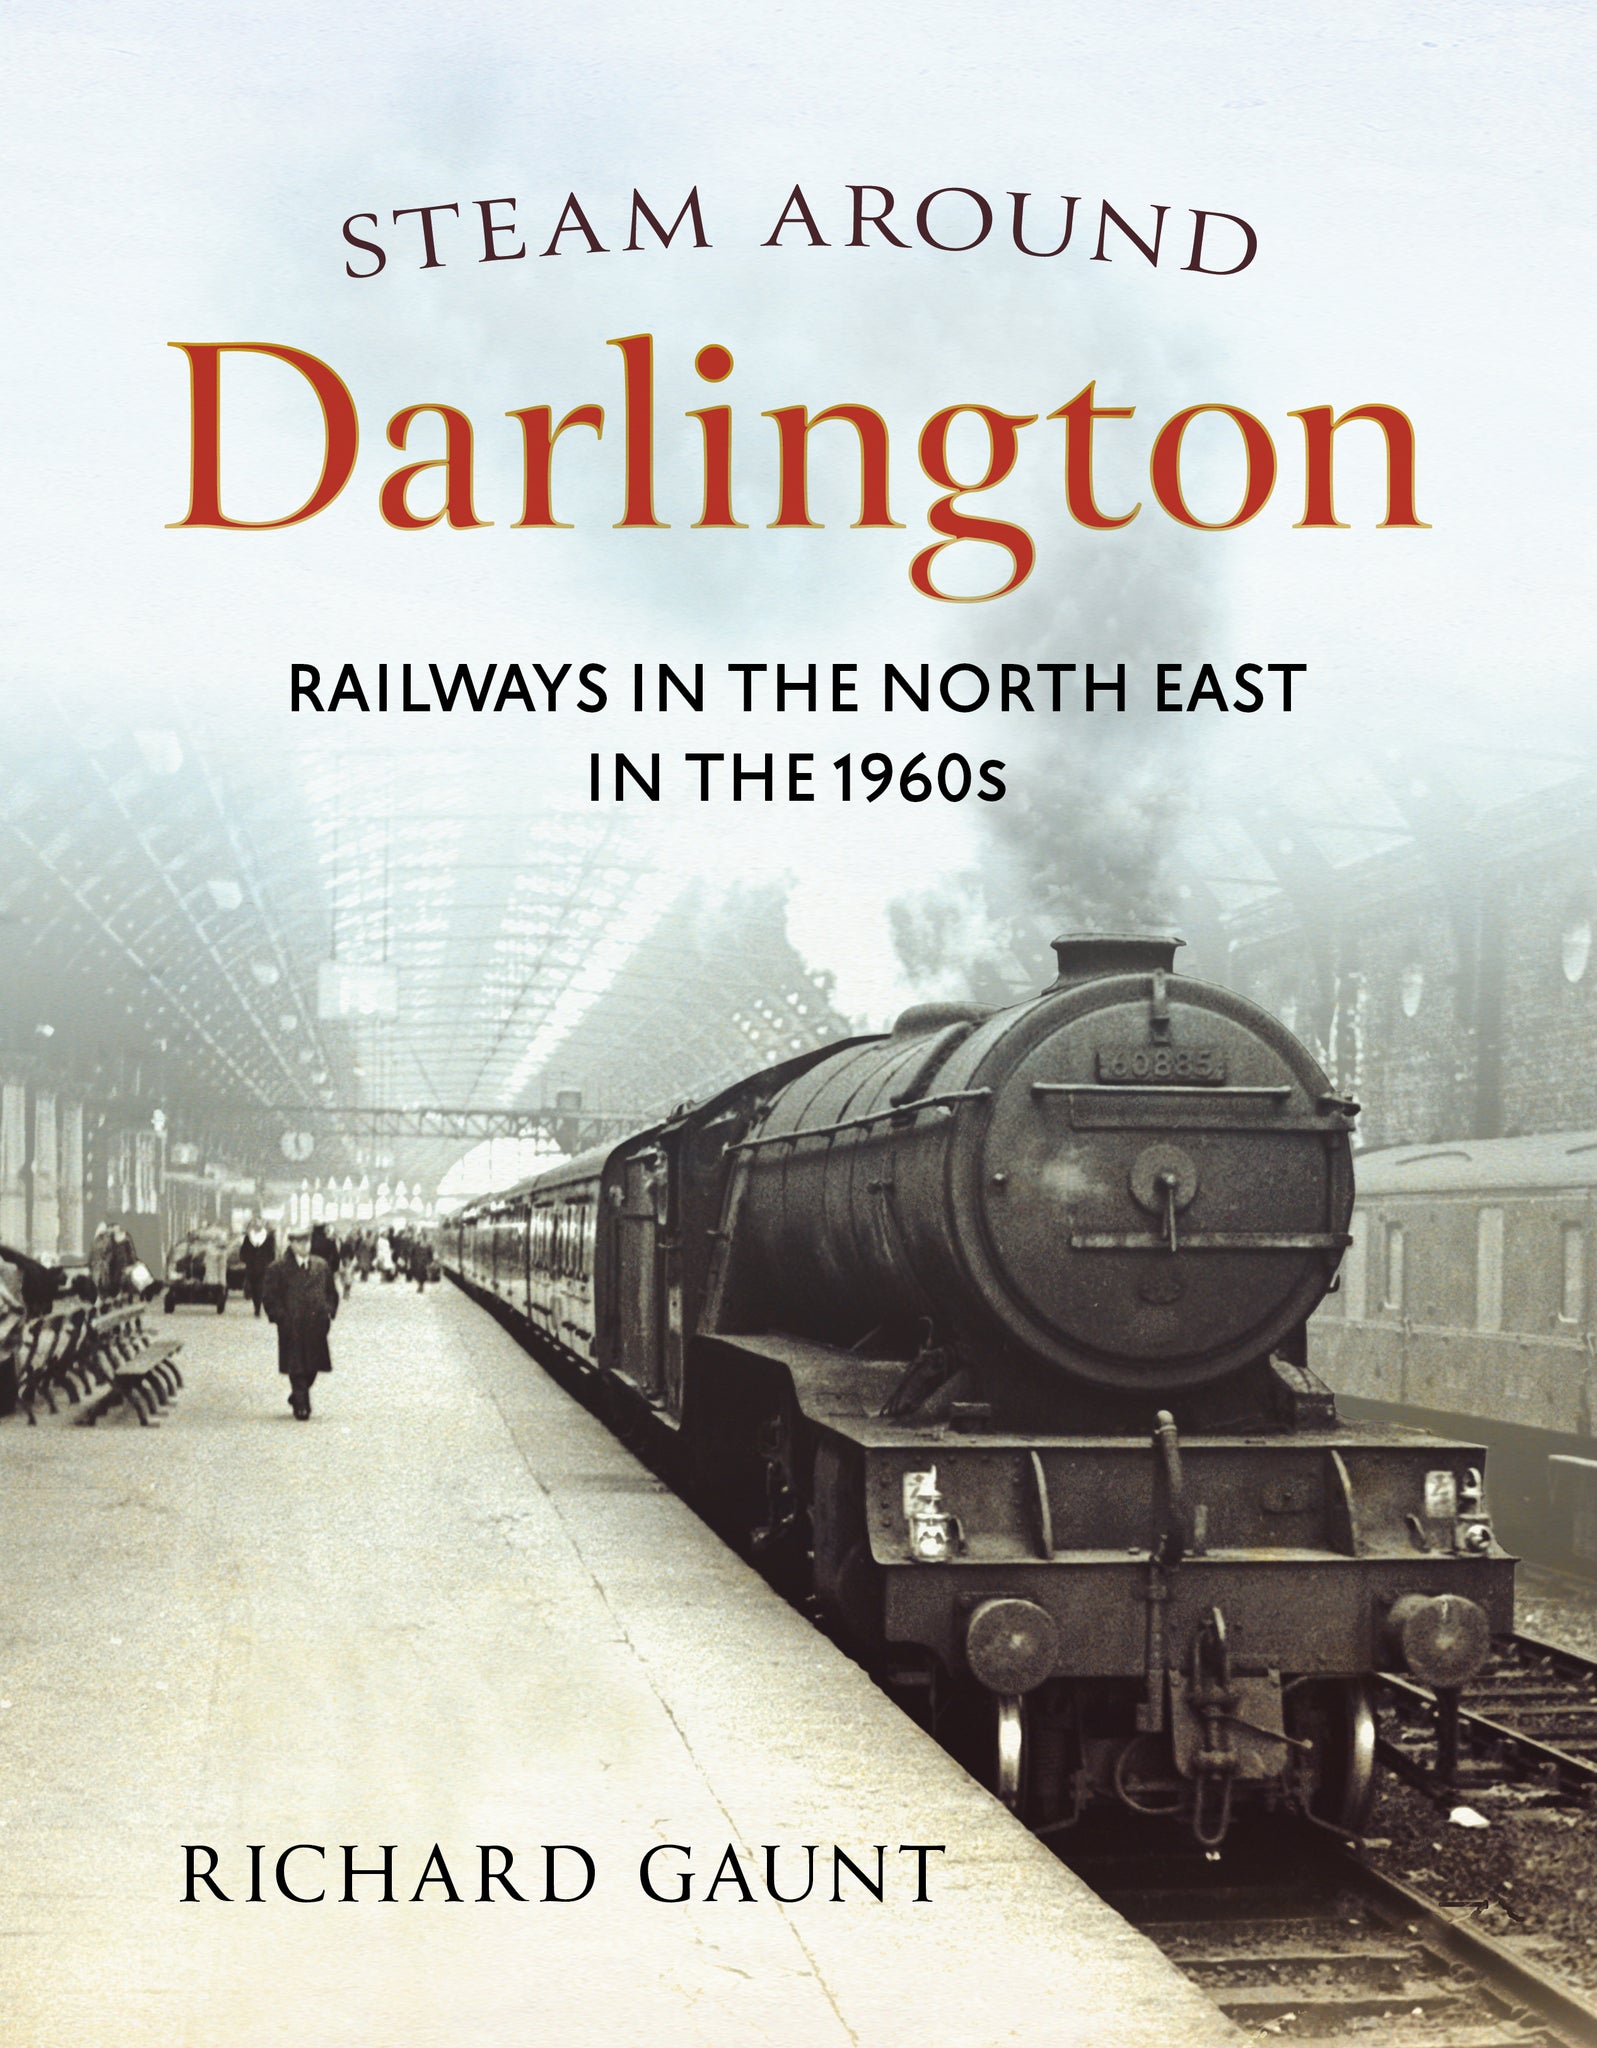 Steam Around Darlington: Railways in the North East in the 1960s